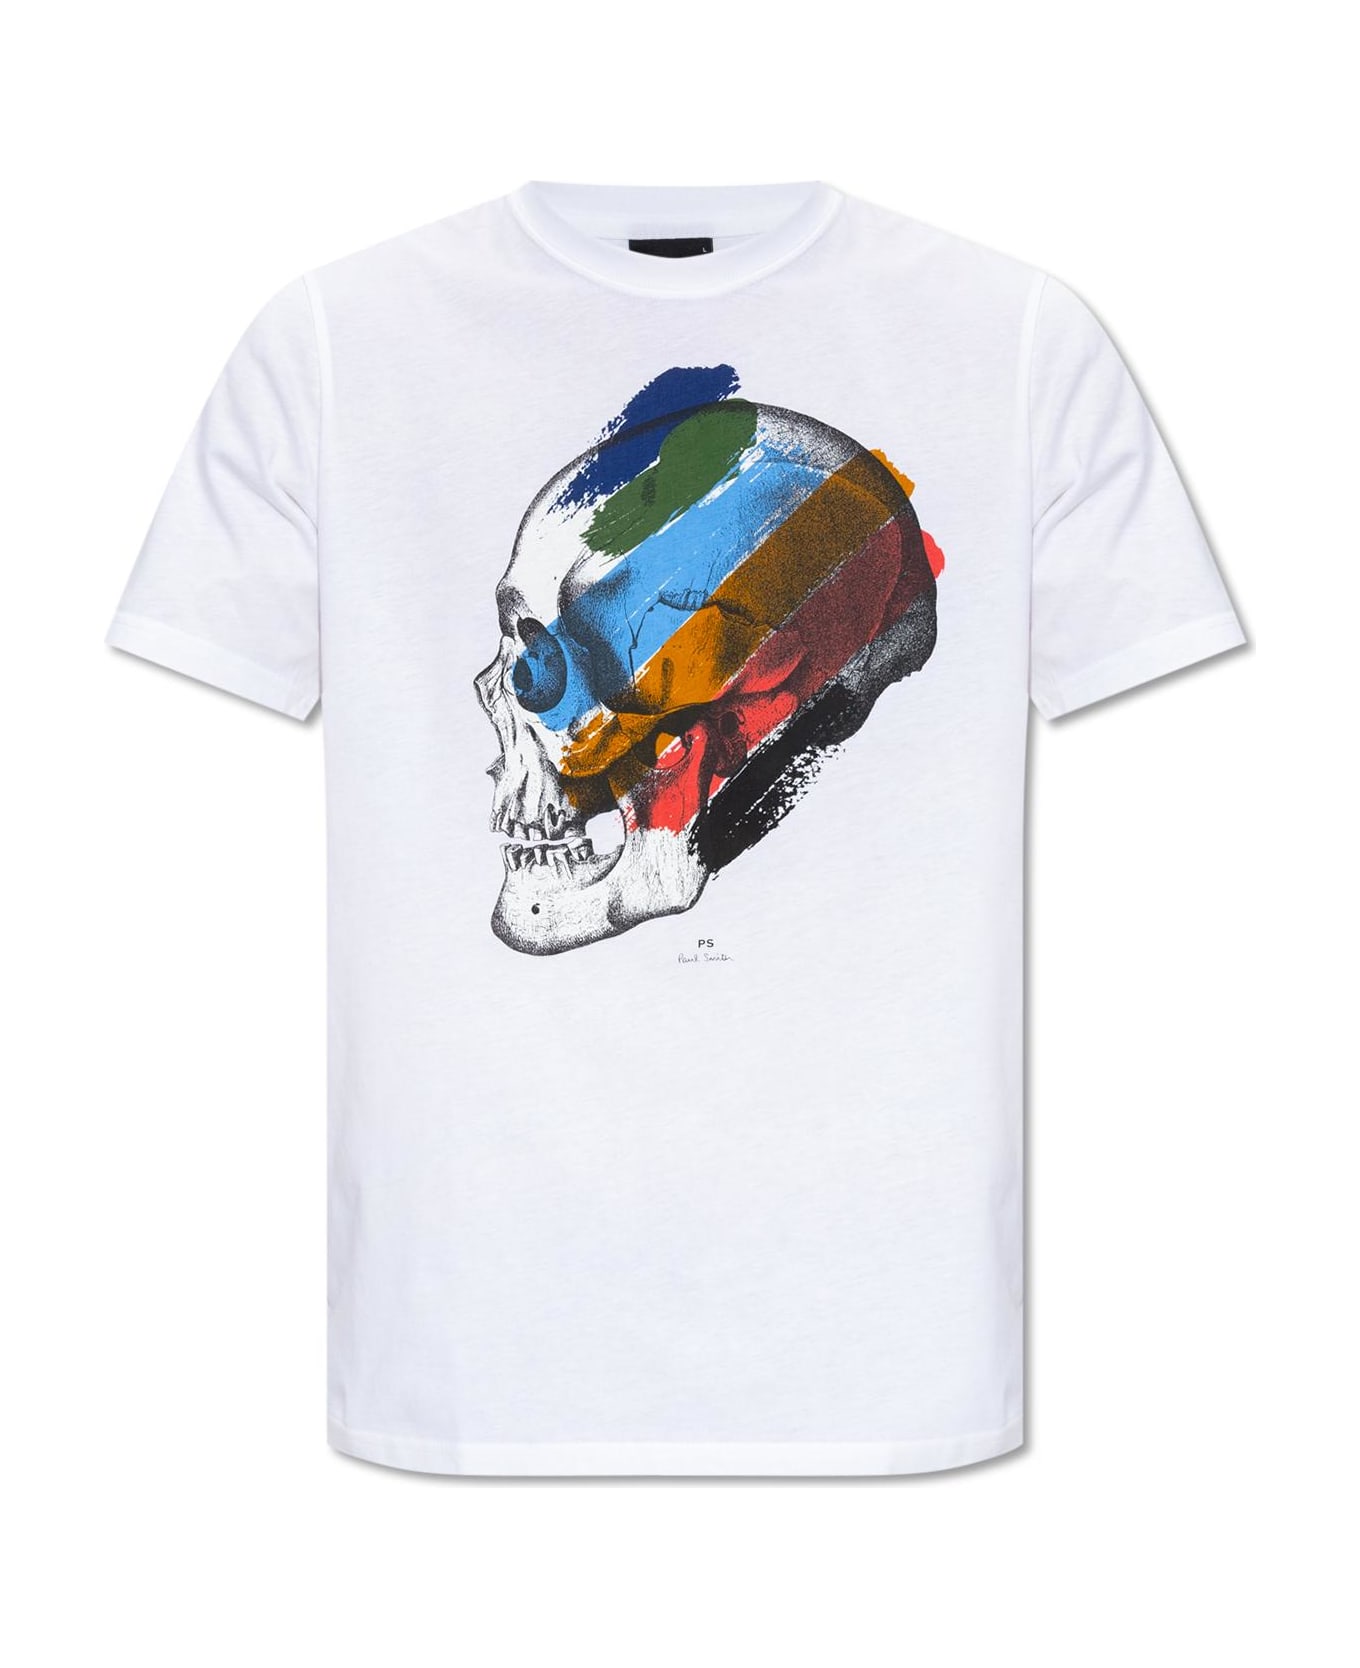 Paul Smith Ps Paul Smith Printed T-shirt Paul Smith - WHITE シャツ